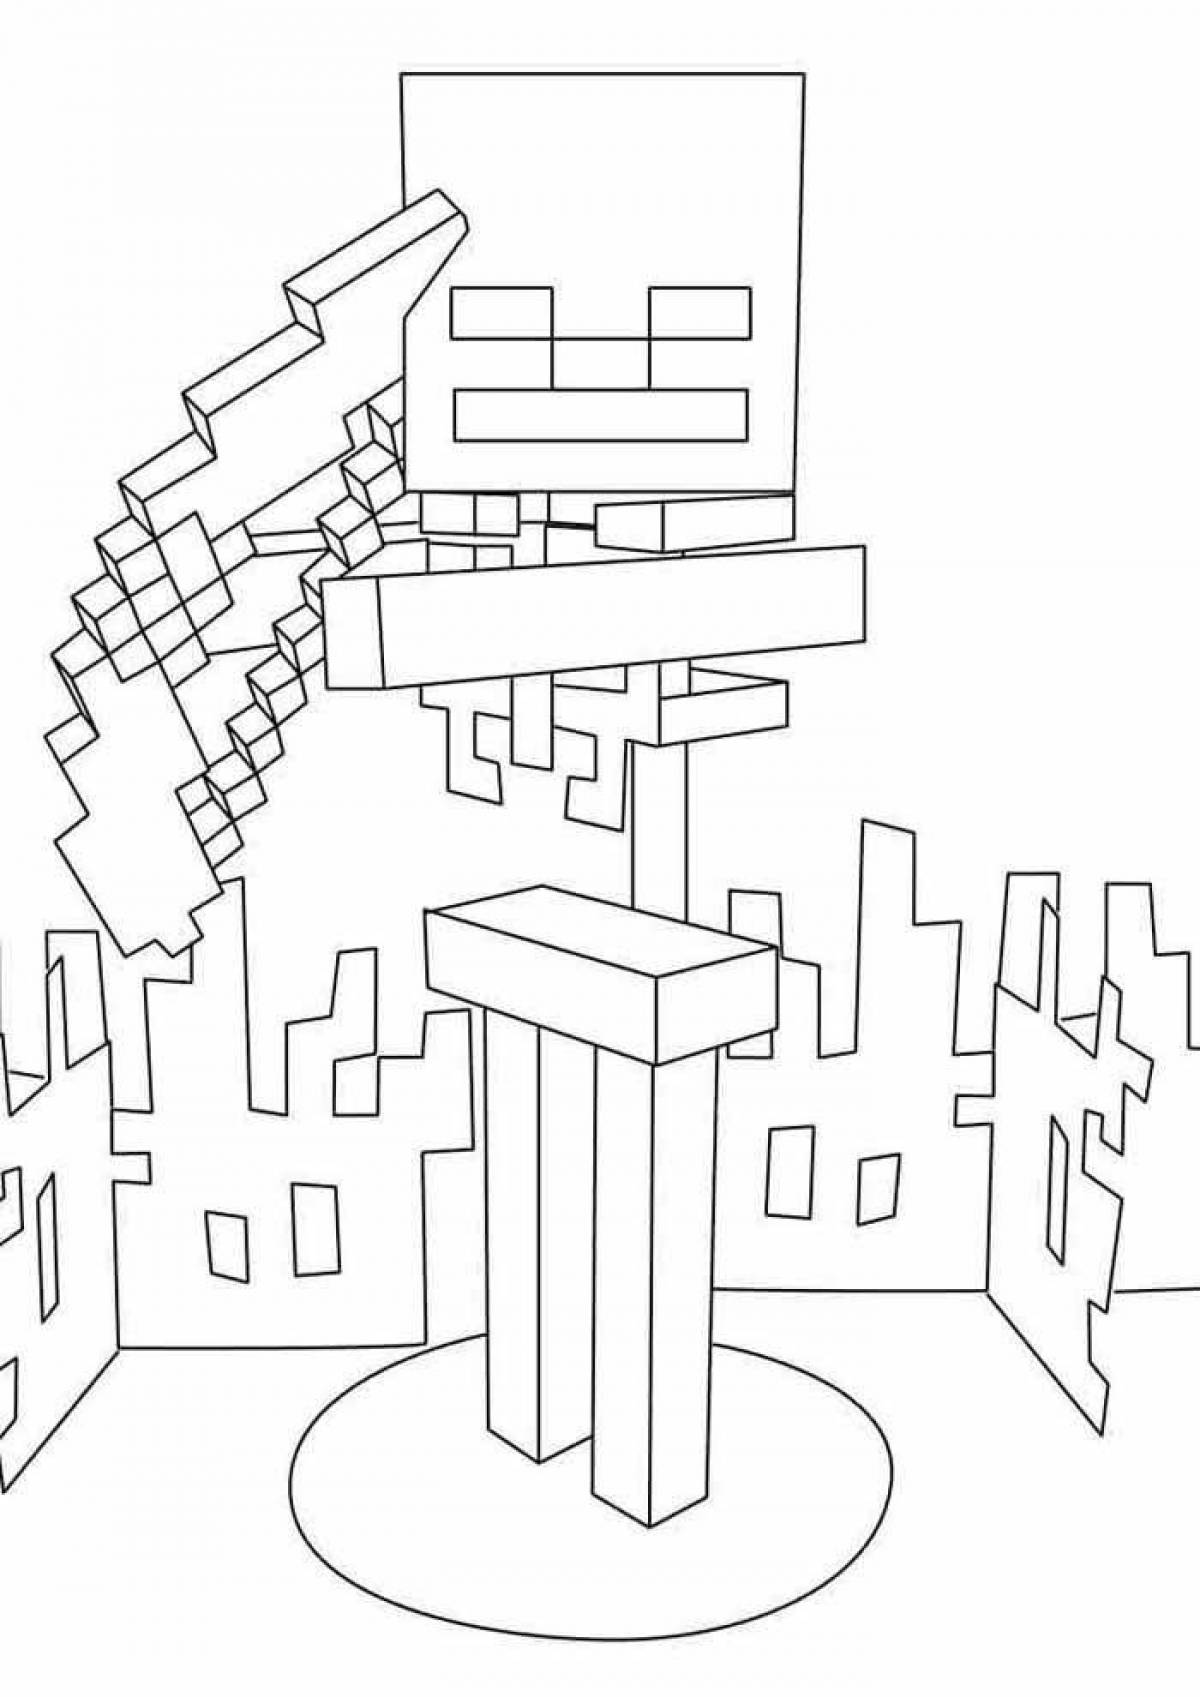 Delightful minecraft house coloring book